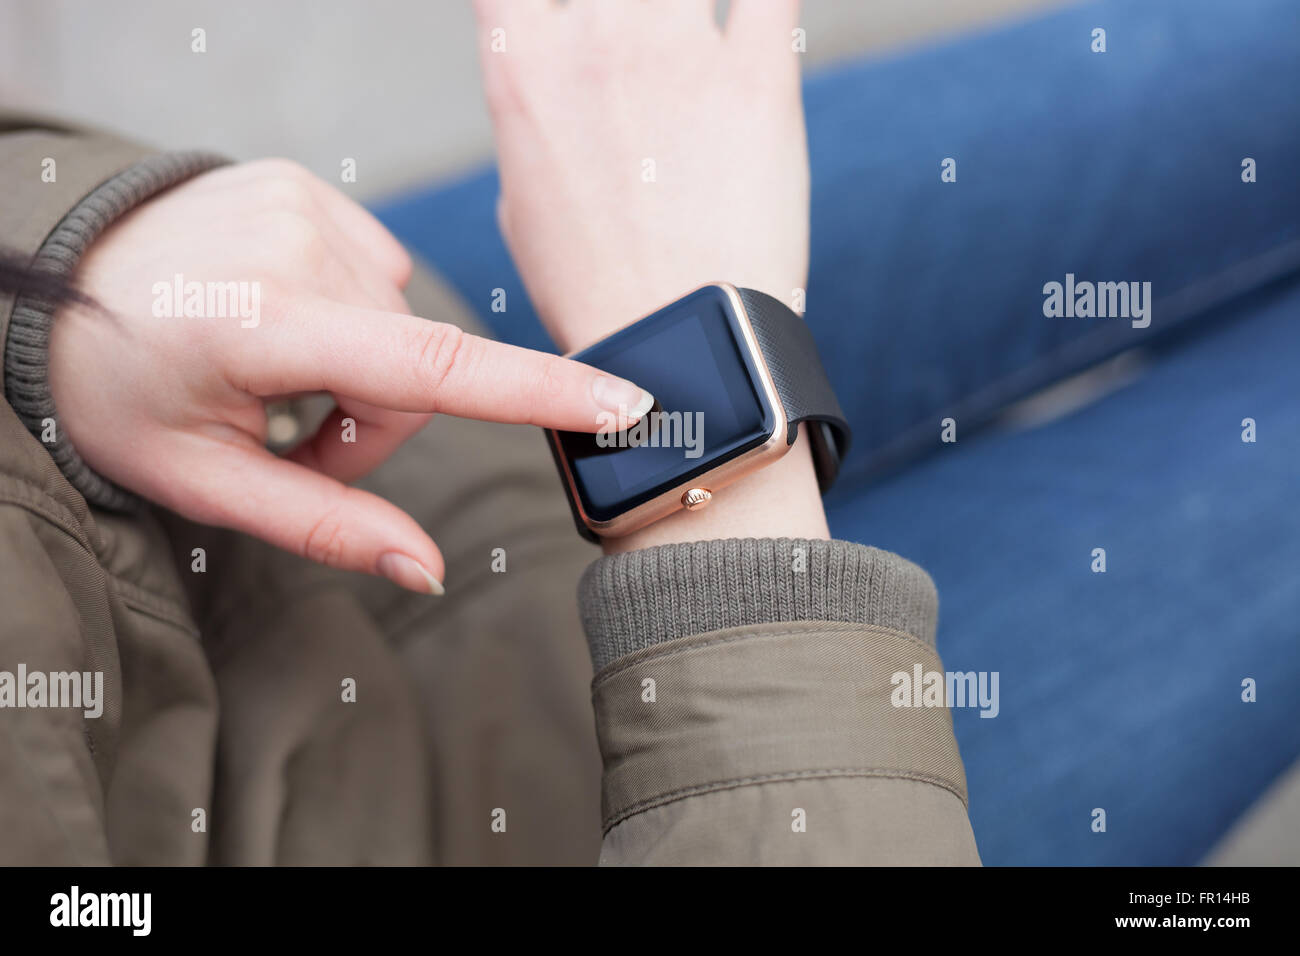 Female hand touching her trendy smart wrist watch with a finger. This person is always connected to social media and internet. Stock Photo